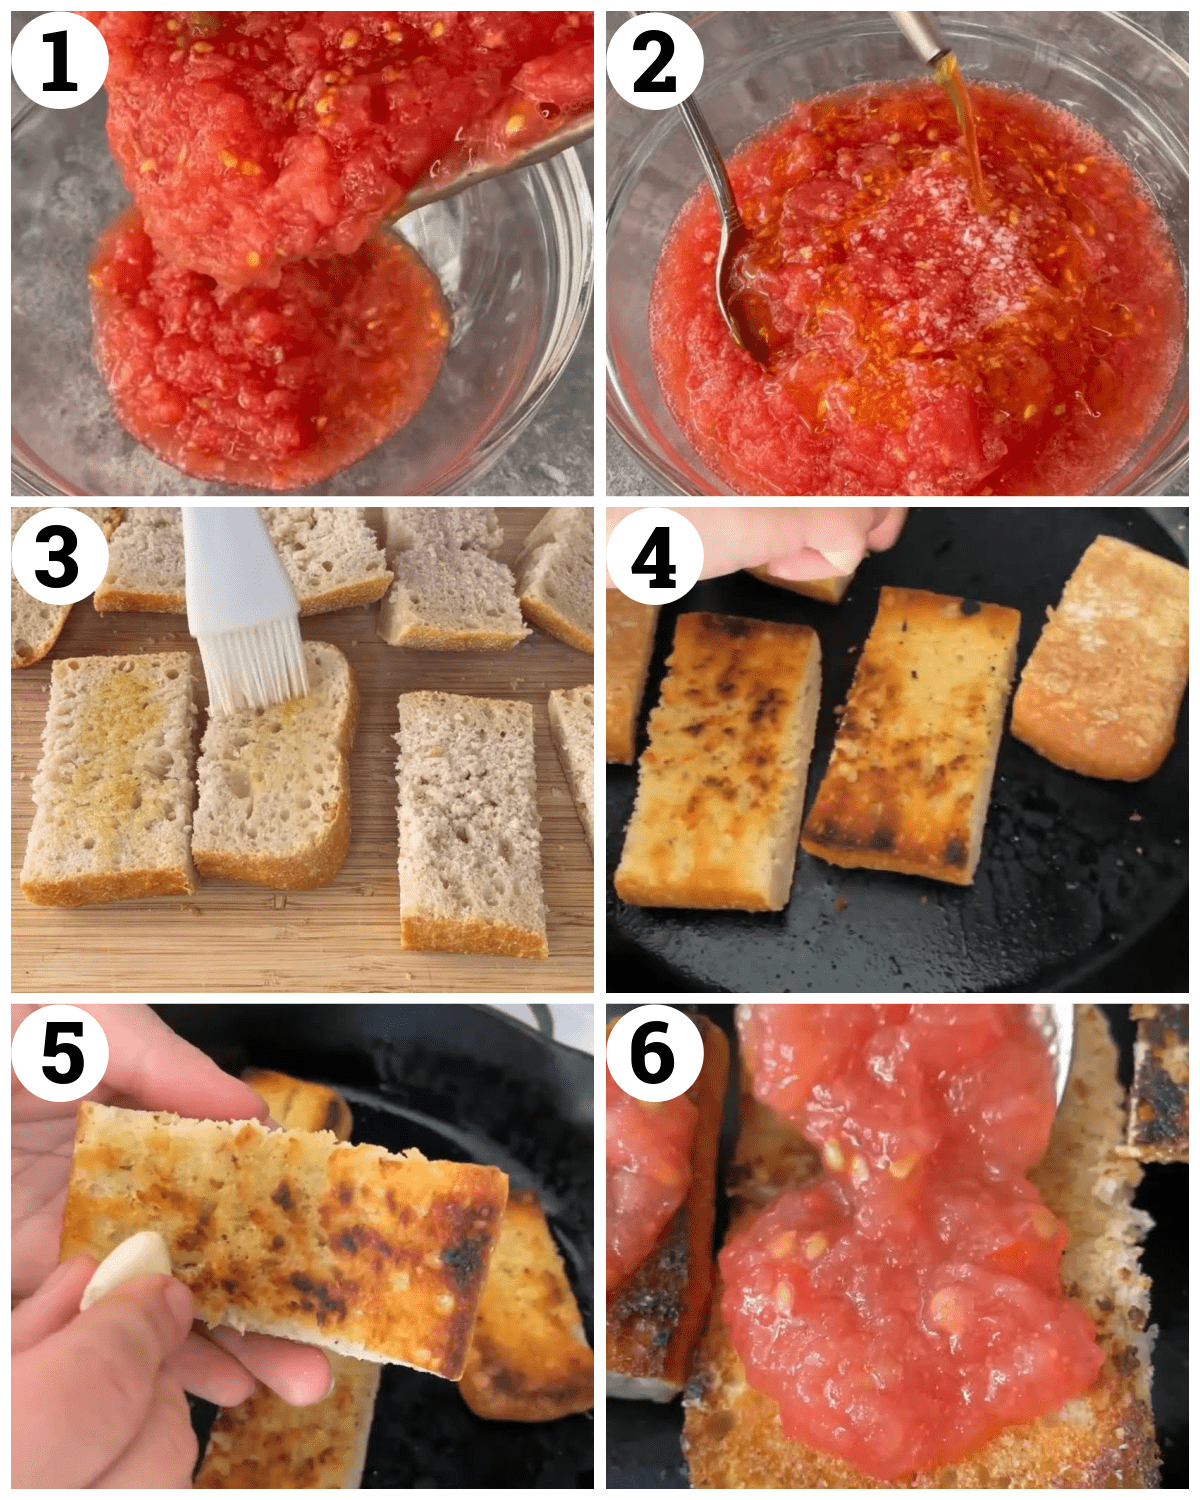 grate the tomatoes and mix with olive oil. Toast the bread and rub with garlic then top with tomatoes. 